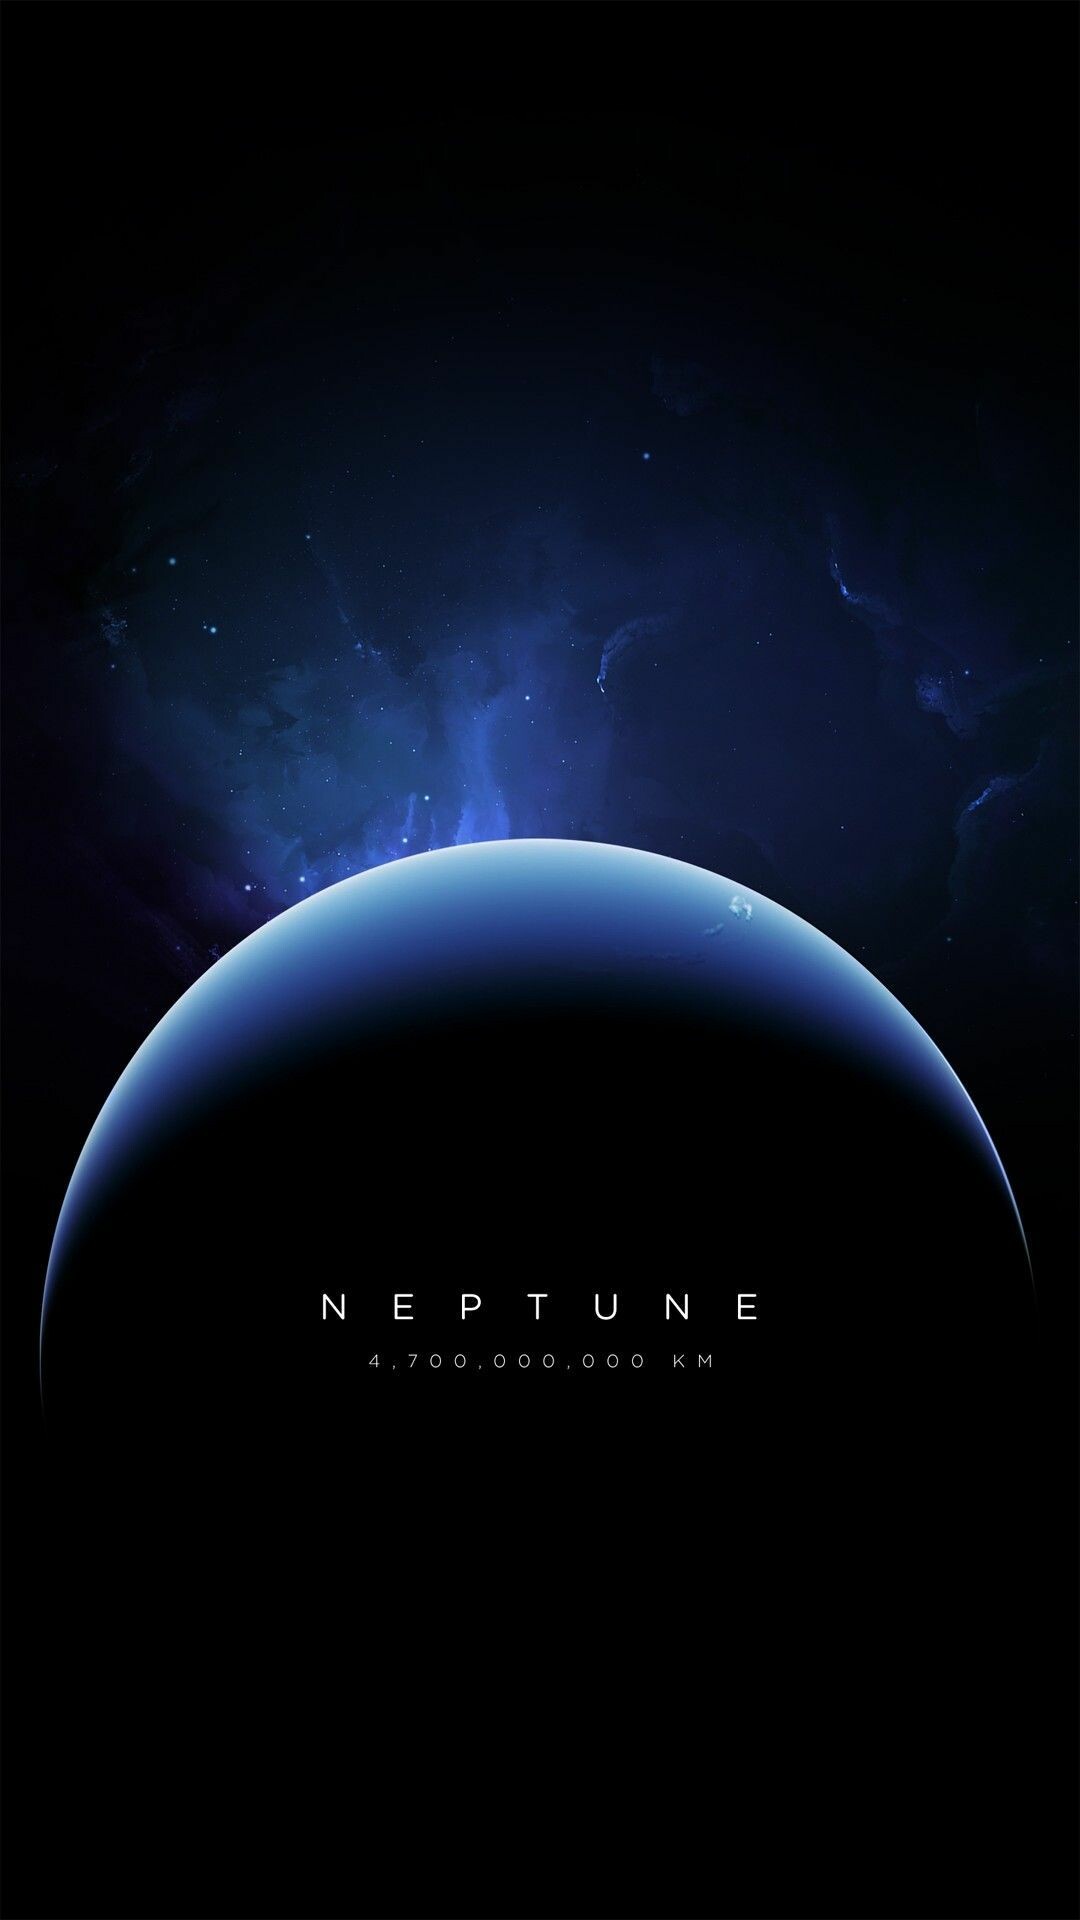 Neptune: Space, Astronomy, The planet is 3.9 times bigger and has 17 times as much mass compared to the Earth. 1080x1920 Full HD Background.